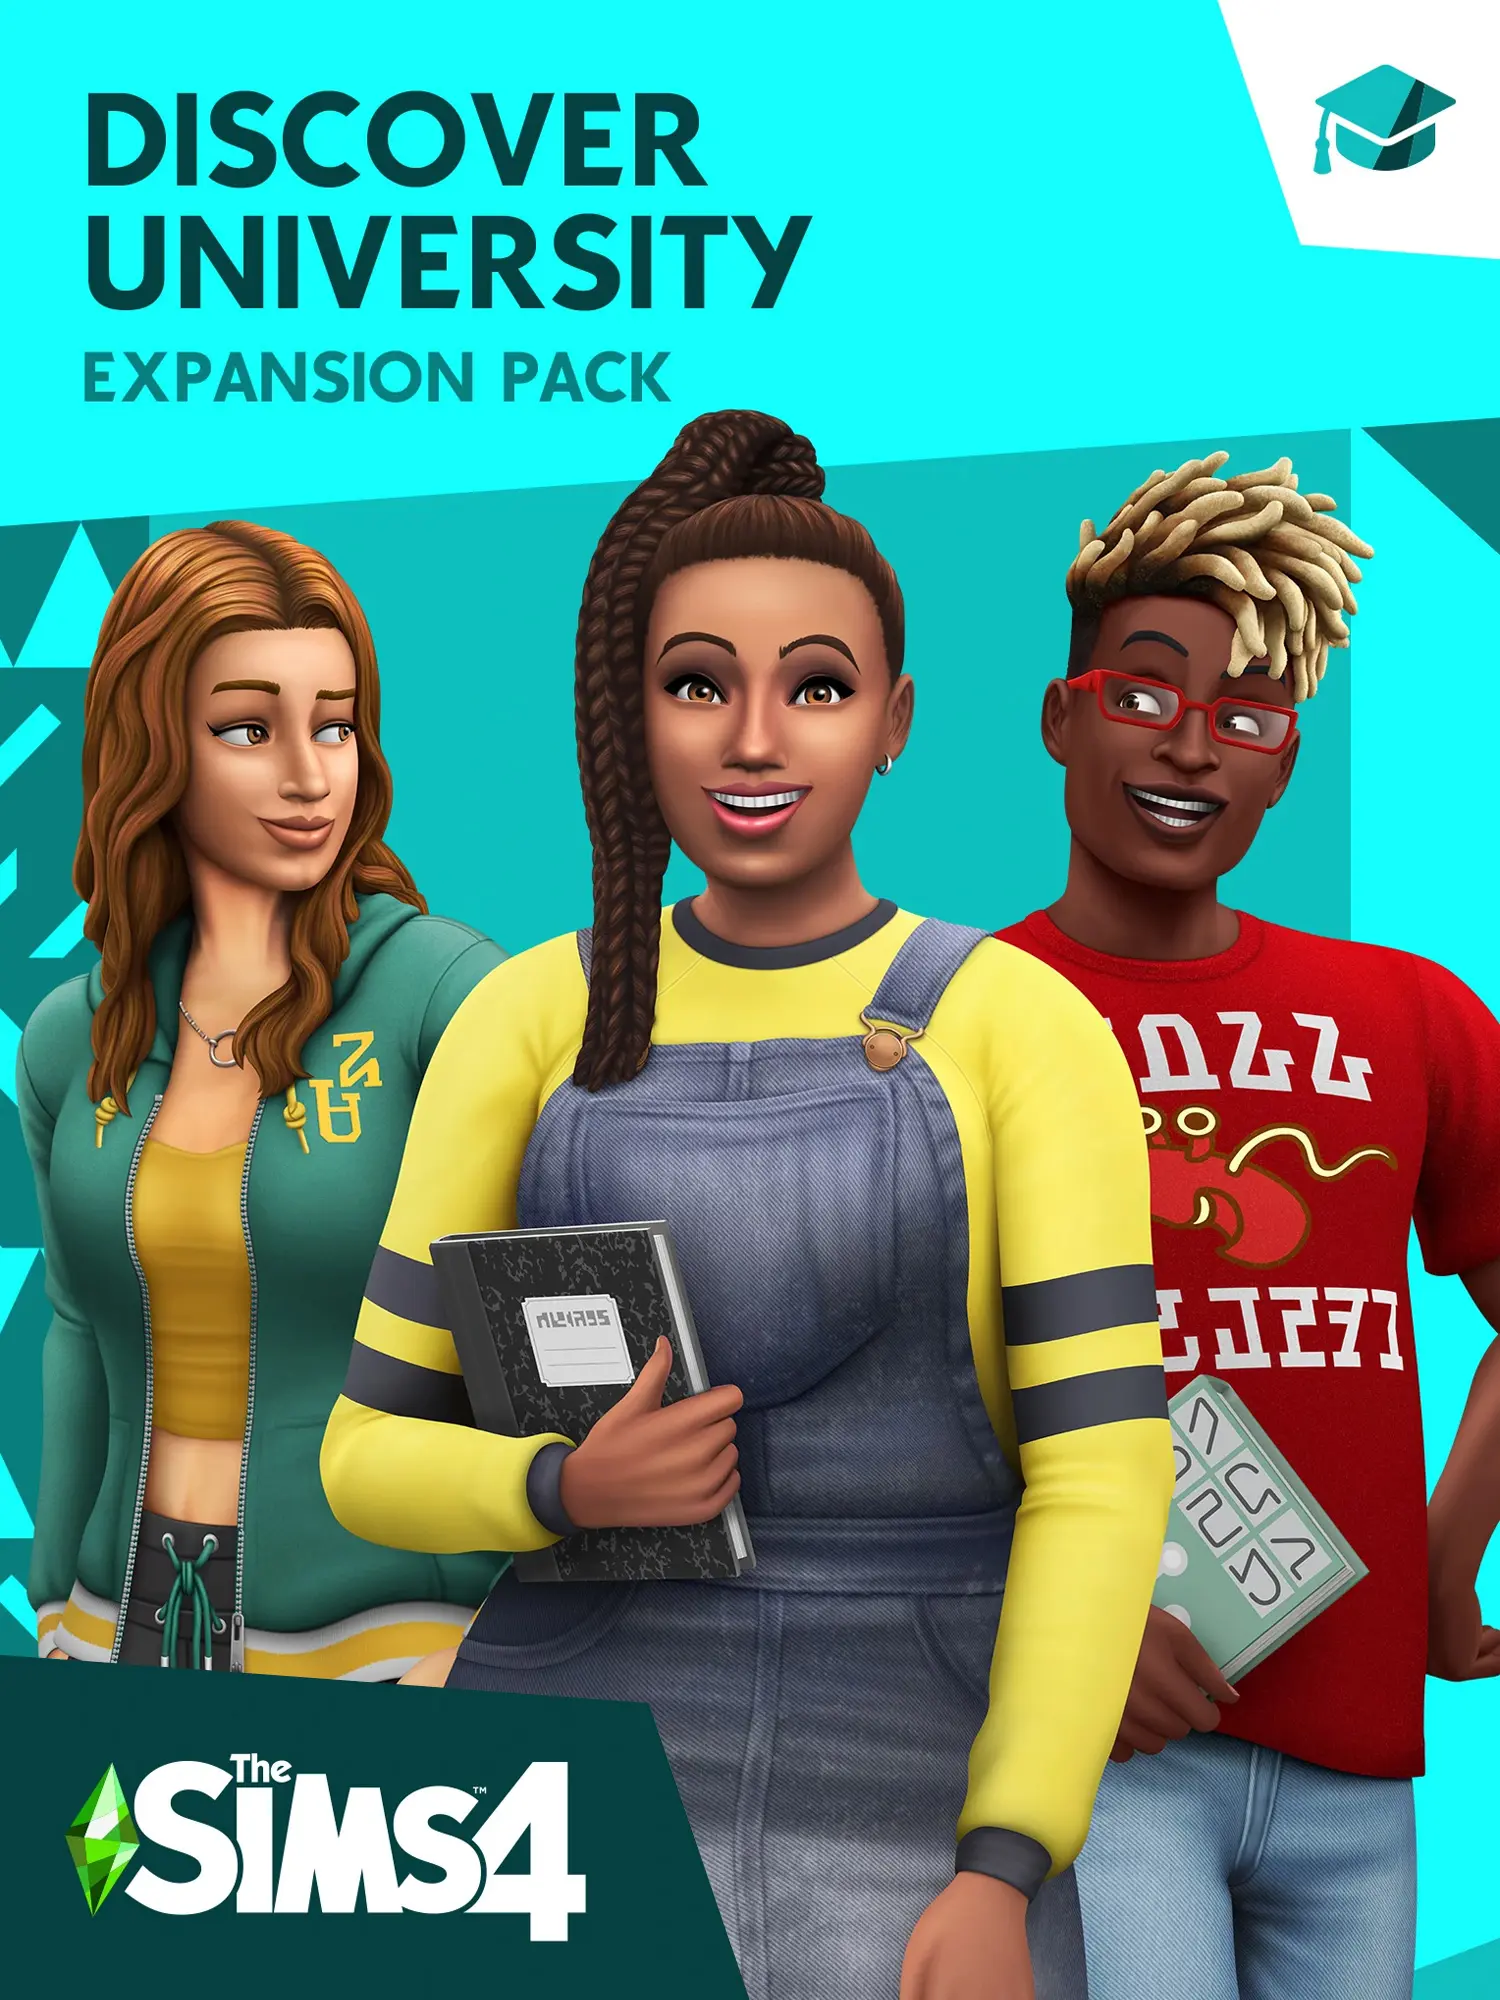 The Sims 4 - Discover University DLC (PC) - EA Play - Digital Code